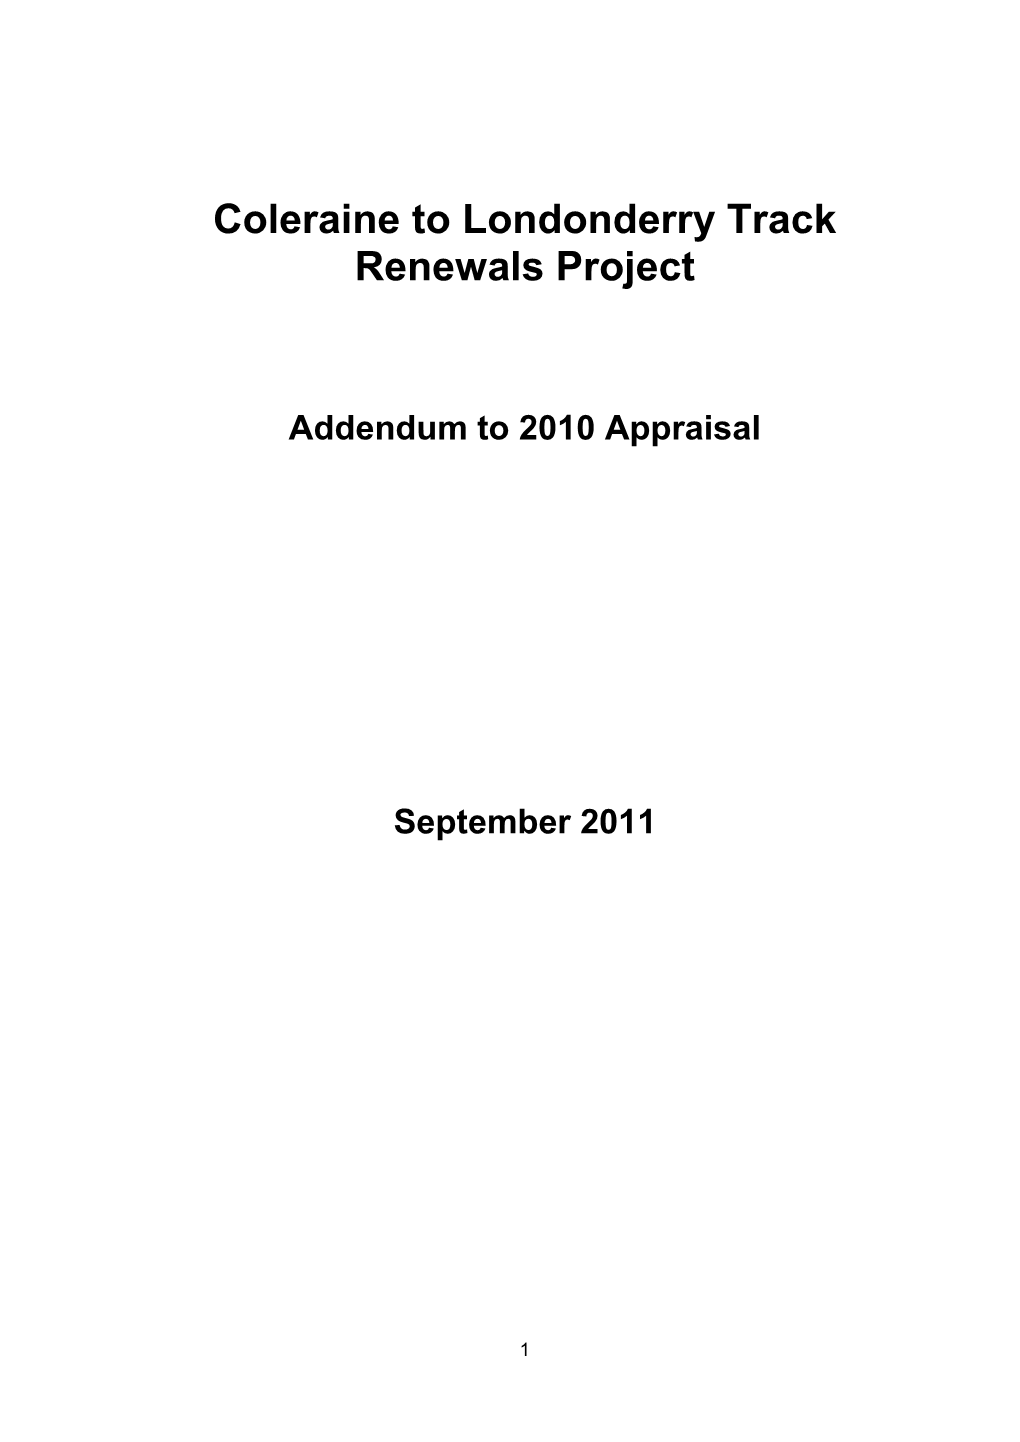 Coleraine to Londonderry Track Renewals Project